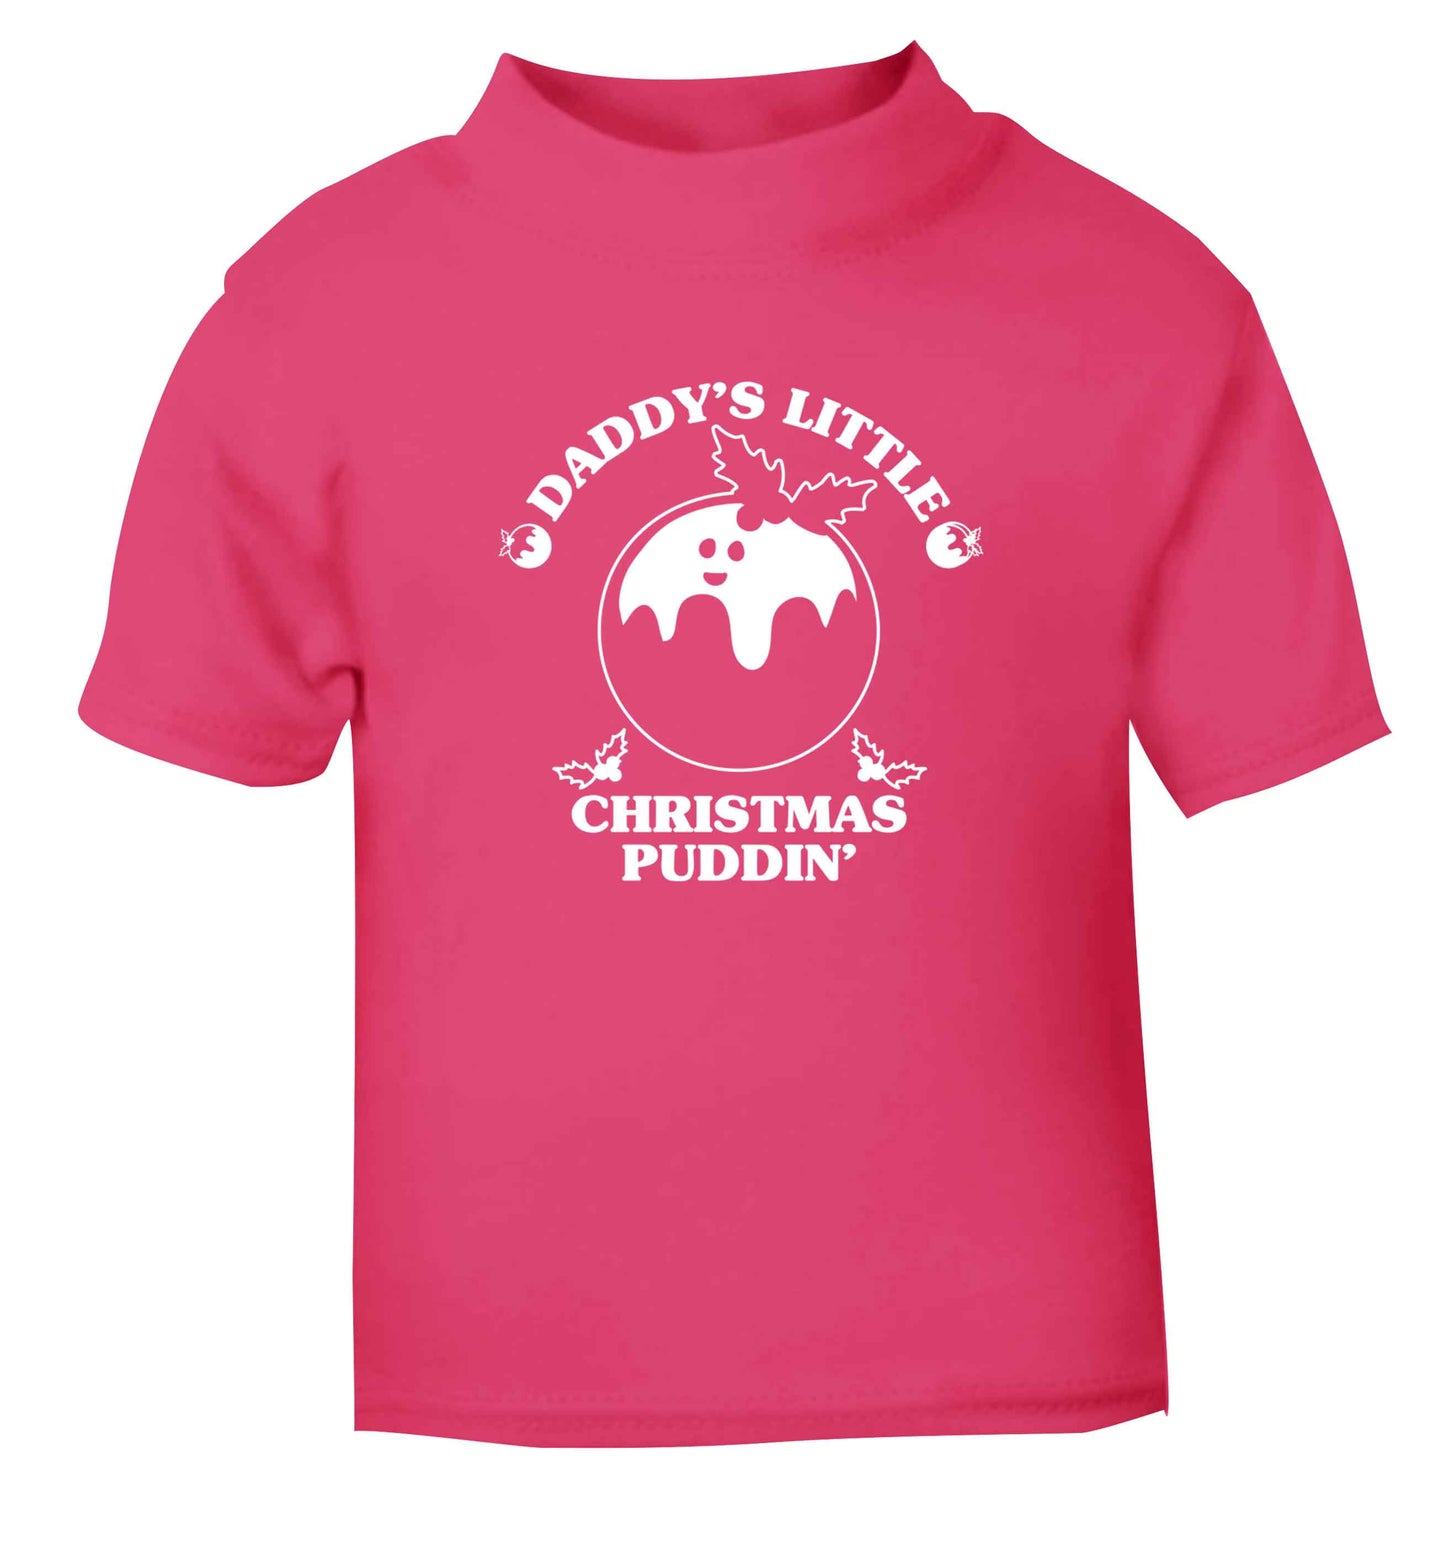 Daddy's little Christmas puddin' pink Baby Toddler Tshirt 2 Years